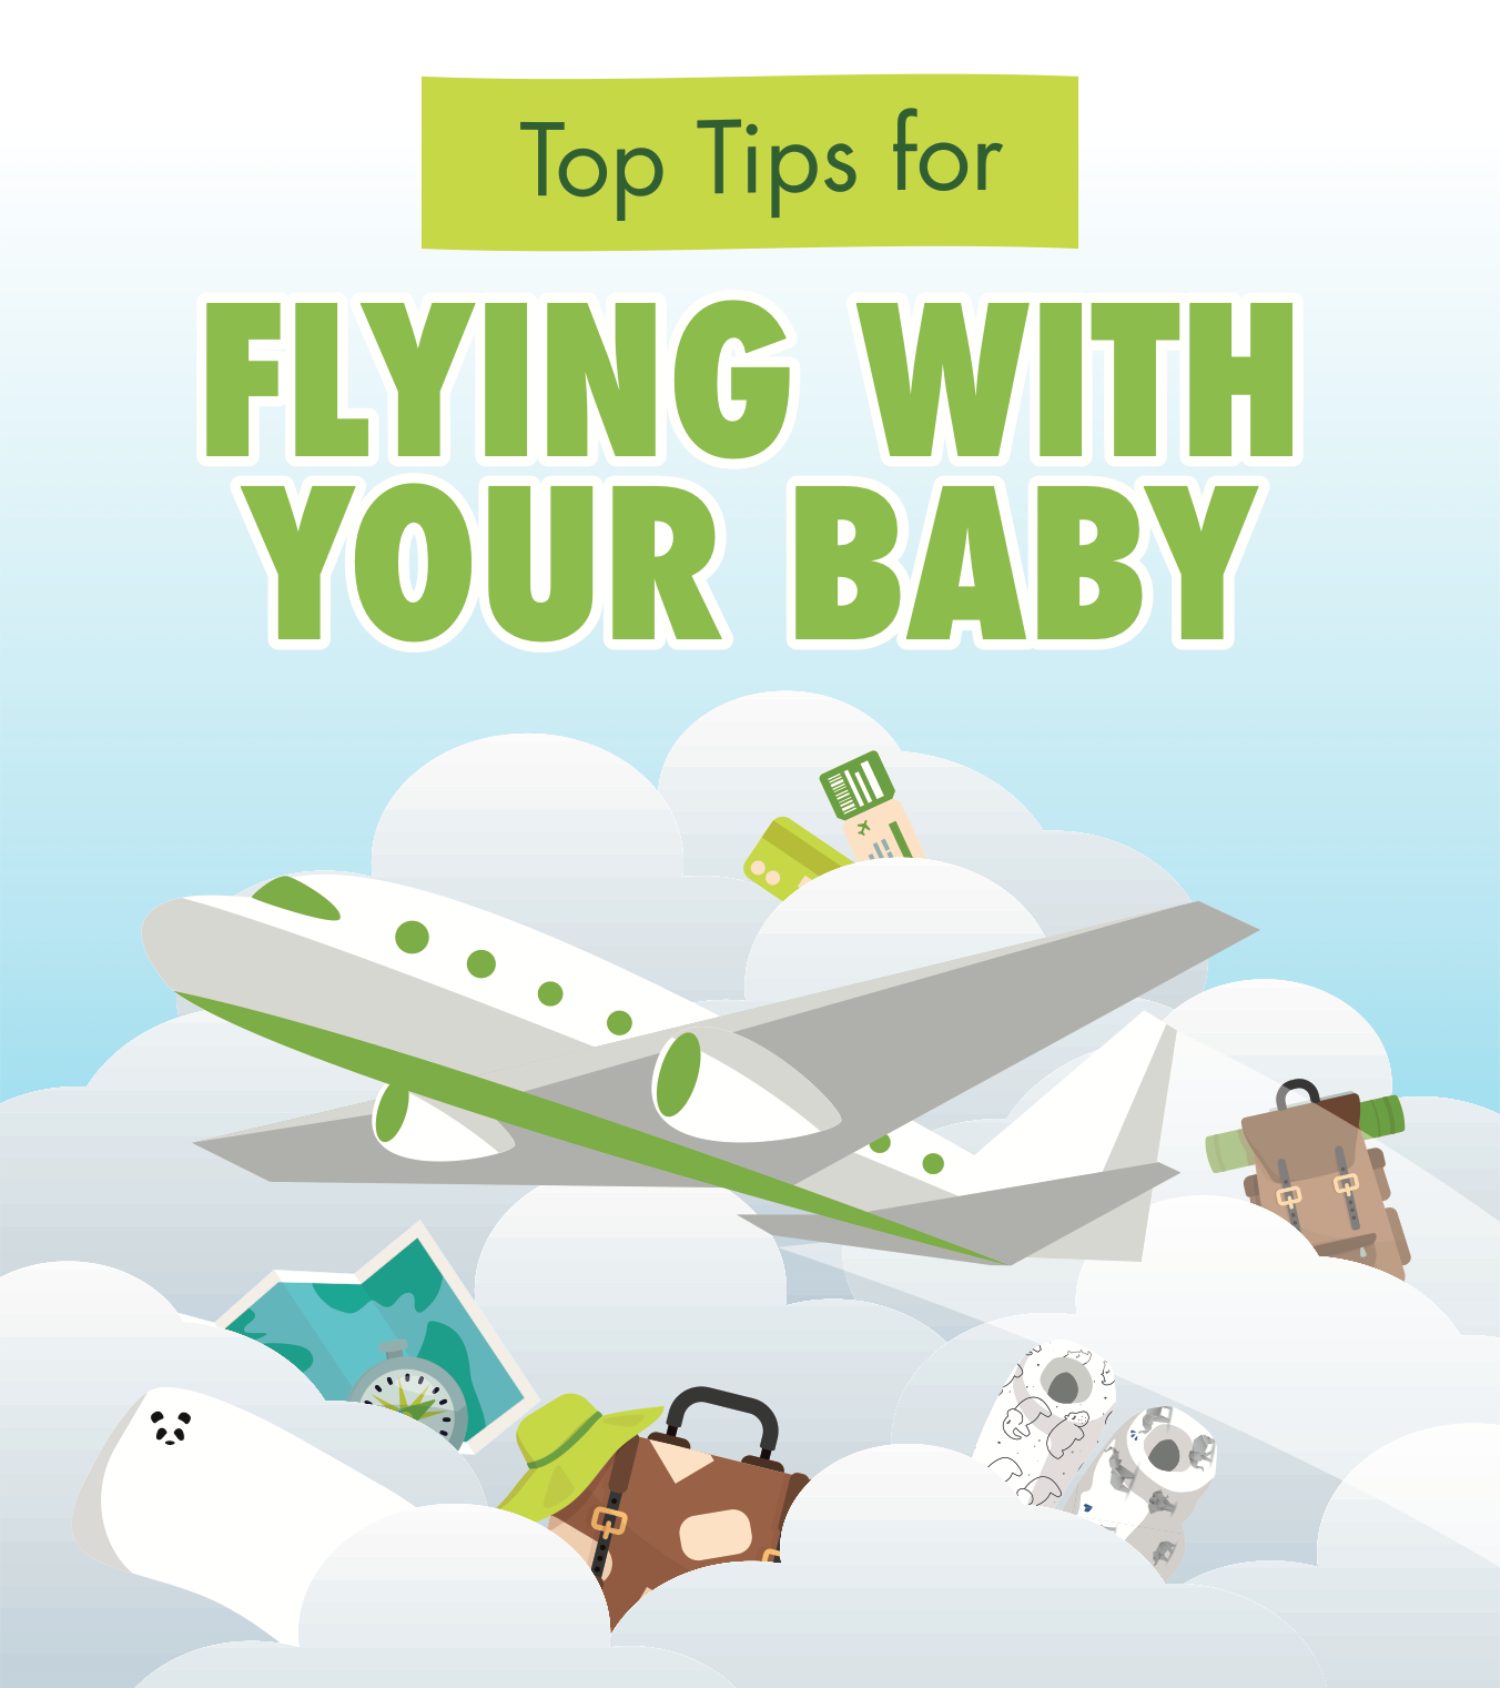 Flying with your baby